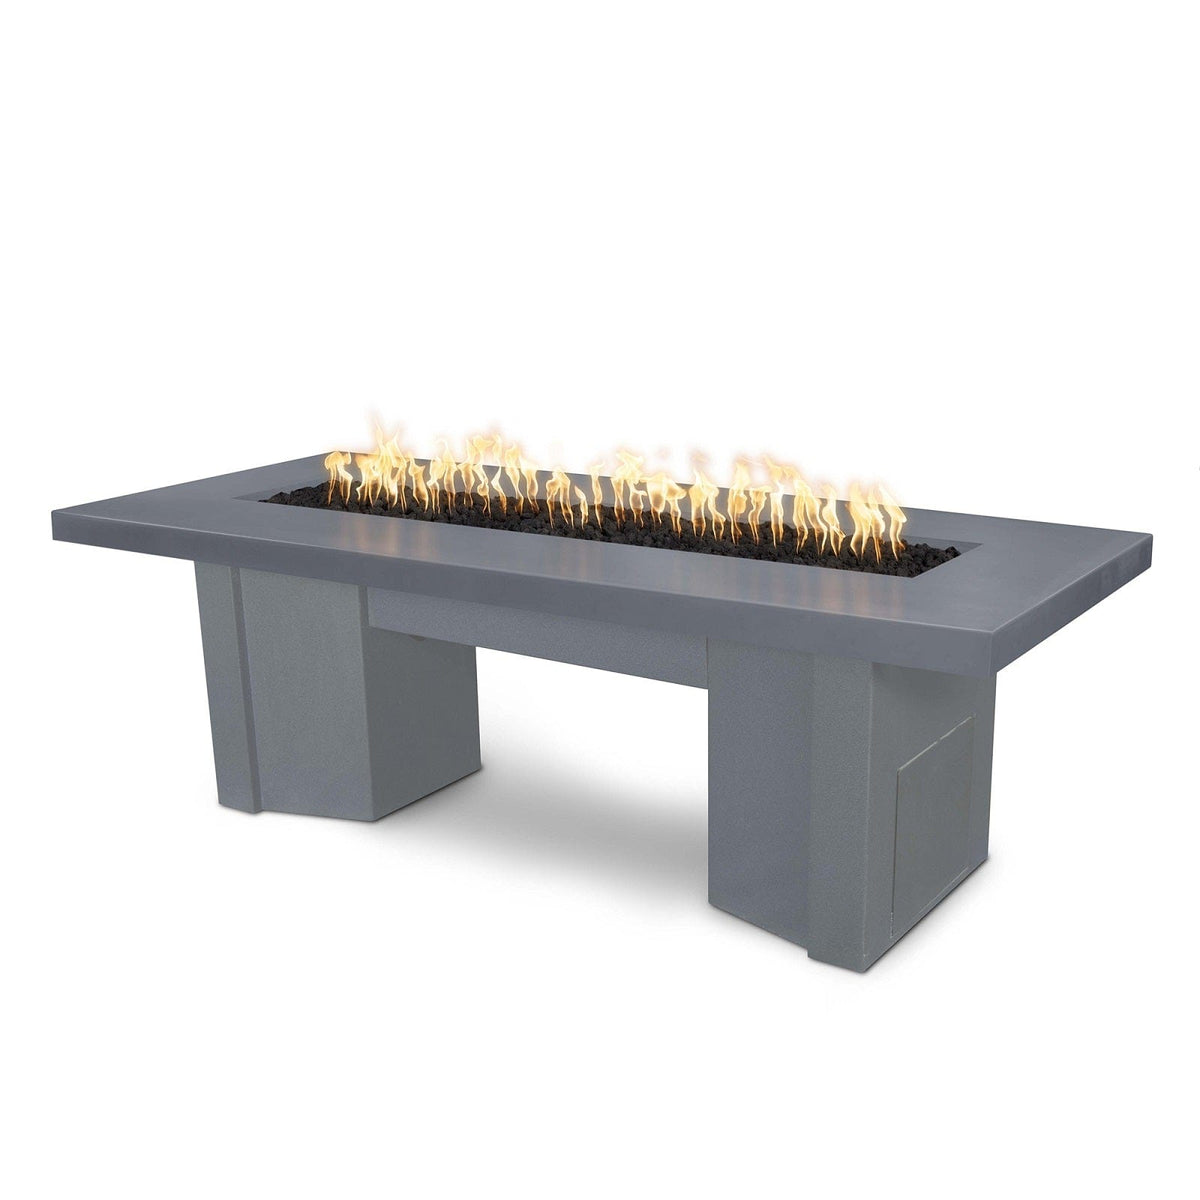 The Outdoor Plus Fire Features Gray (-GRY) / Gray Powder Coated Steel (-GRY) The Outdoor Plus 60&quot; Alameda Fire Table Smooth Concrete in Natural Gas - Match Lit / OPT-ALMGFRC60-NG